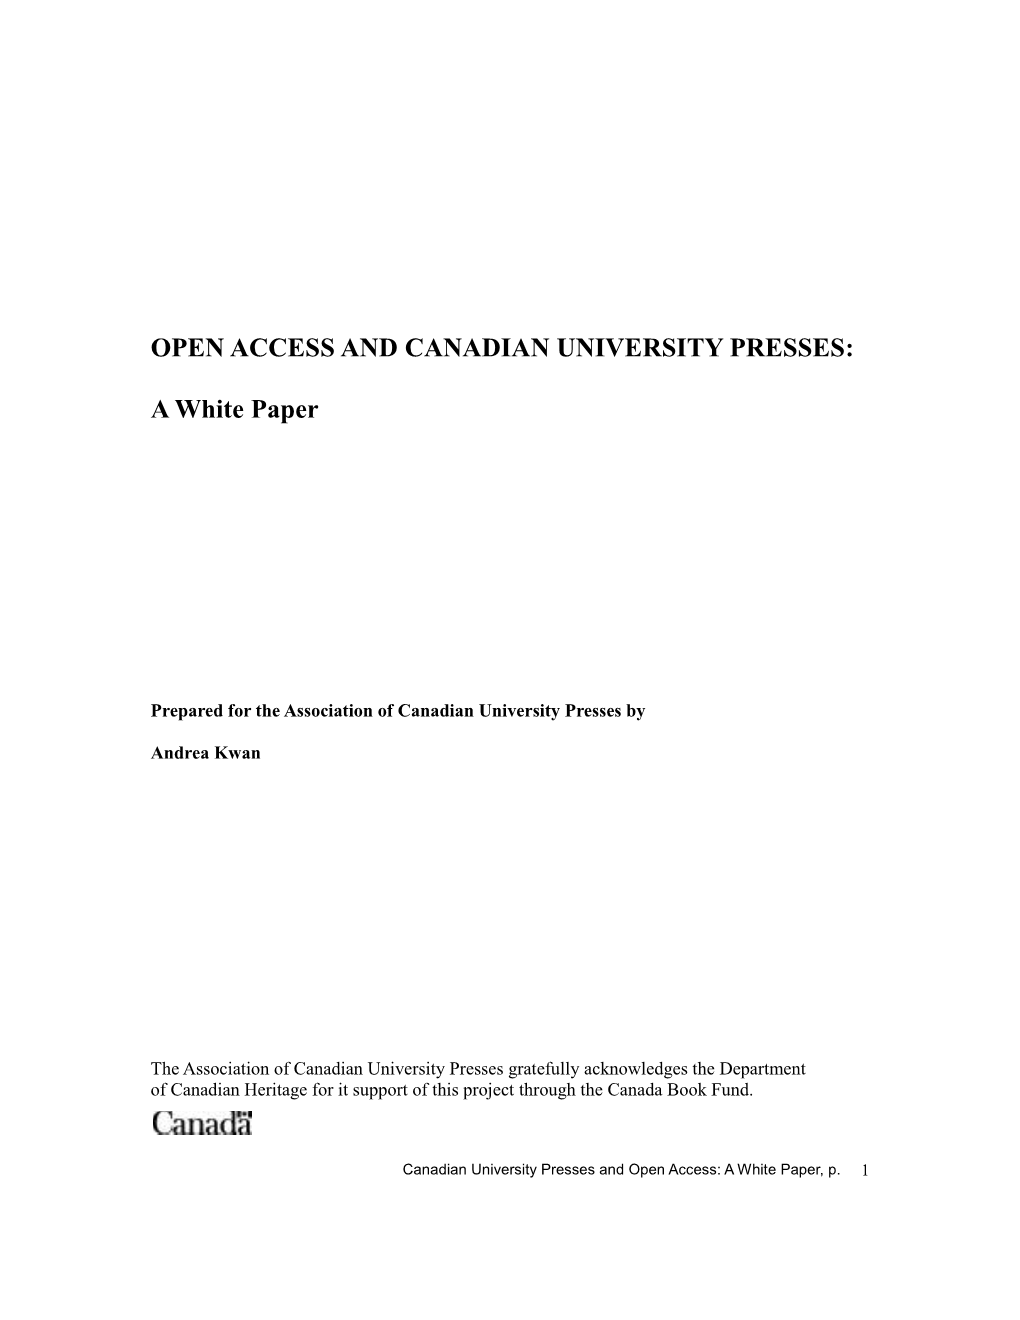 Open Access and Canadian University Presses